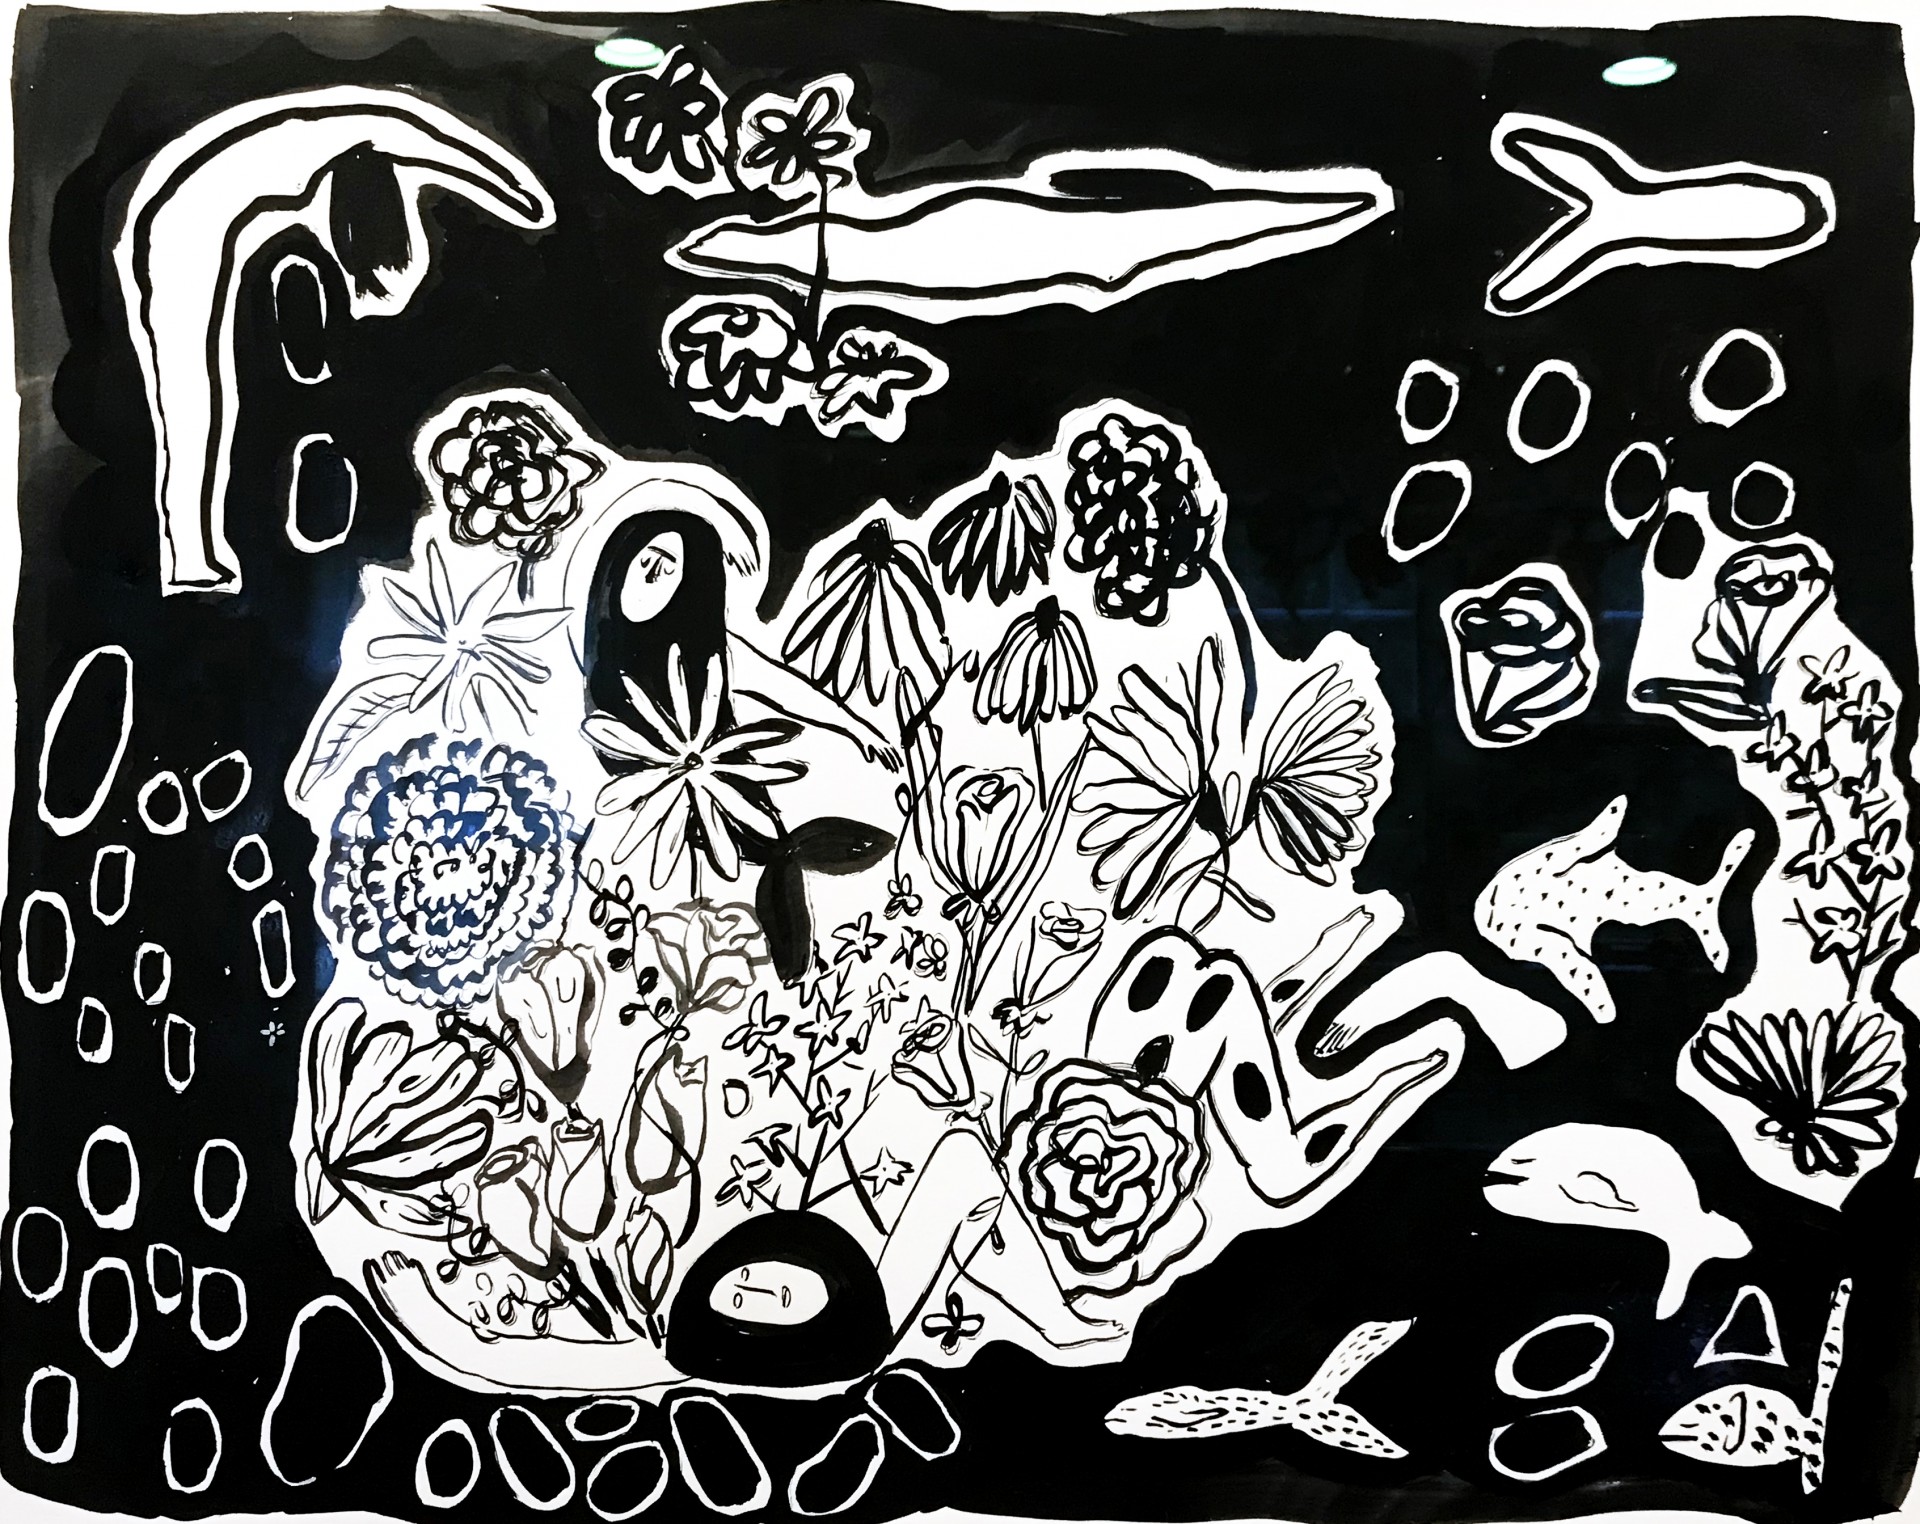 Central composition of flowers and figures. Figure transforming into fish. Elements of fish and circles on edge of painting